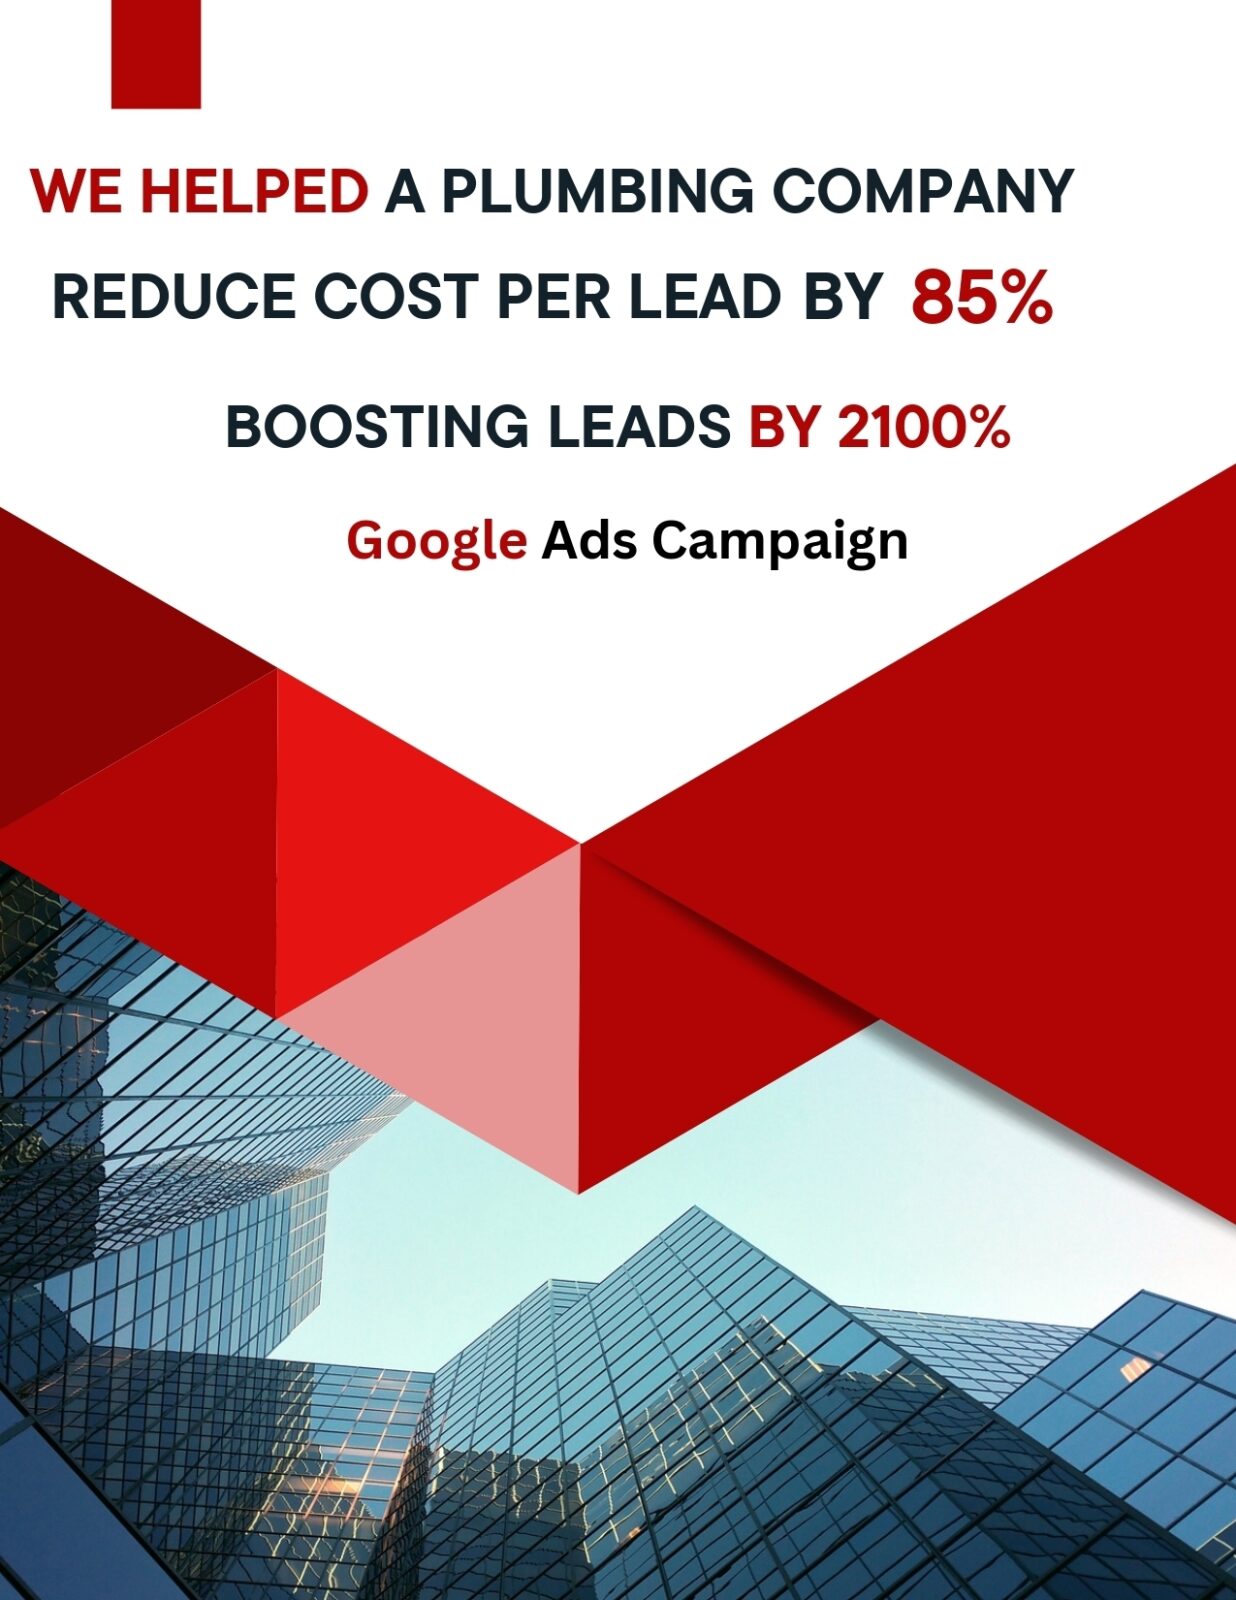 Boosted Leads by 2100% and Reducing Cost Per Lead by 85%